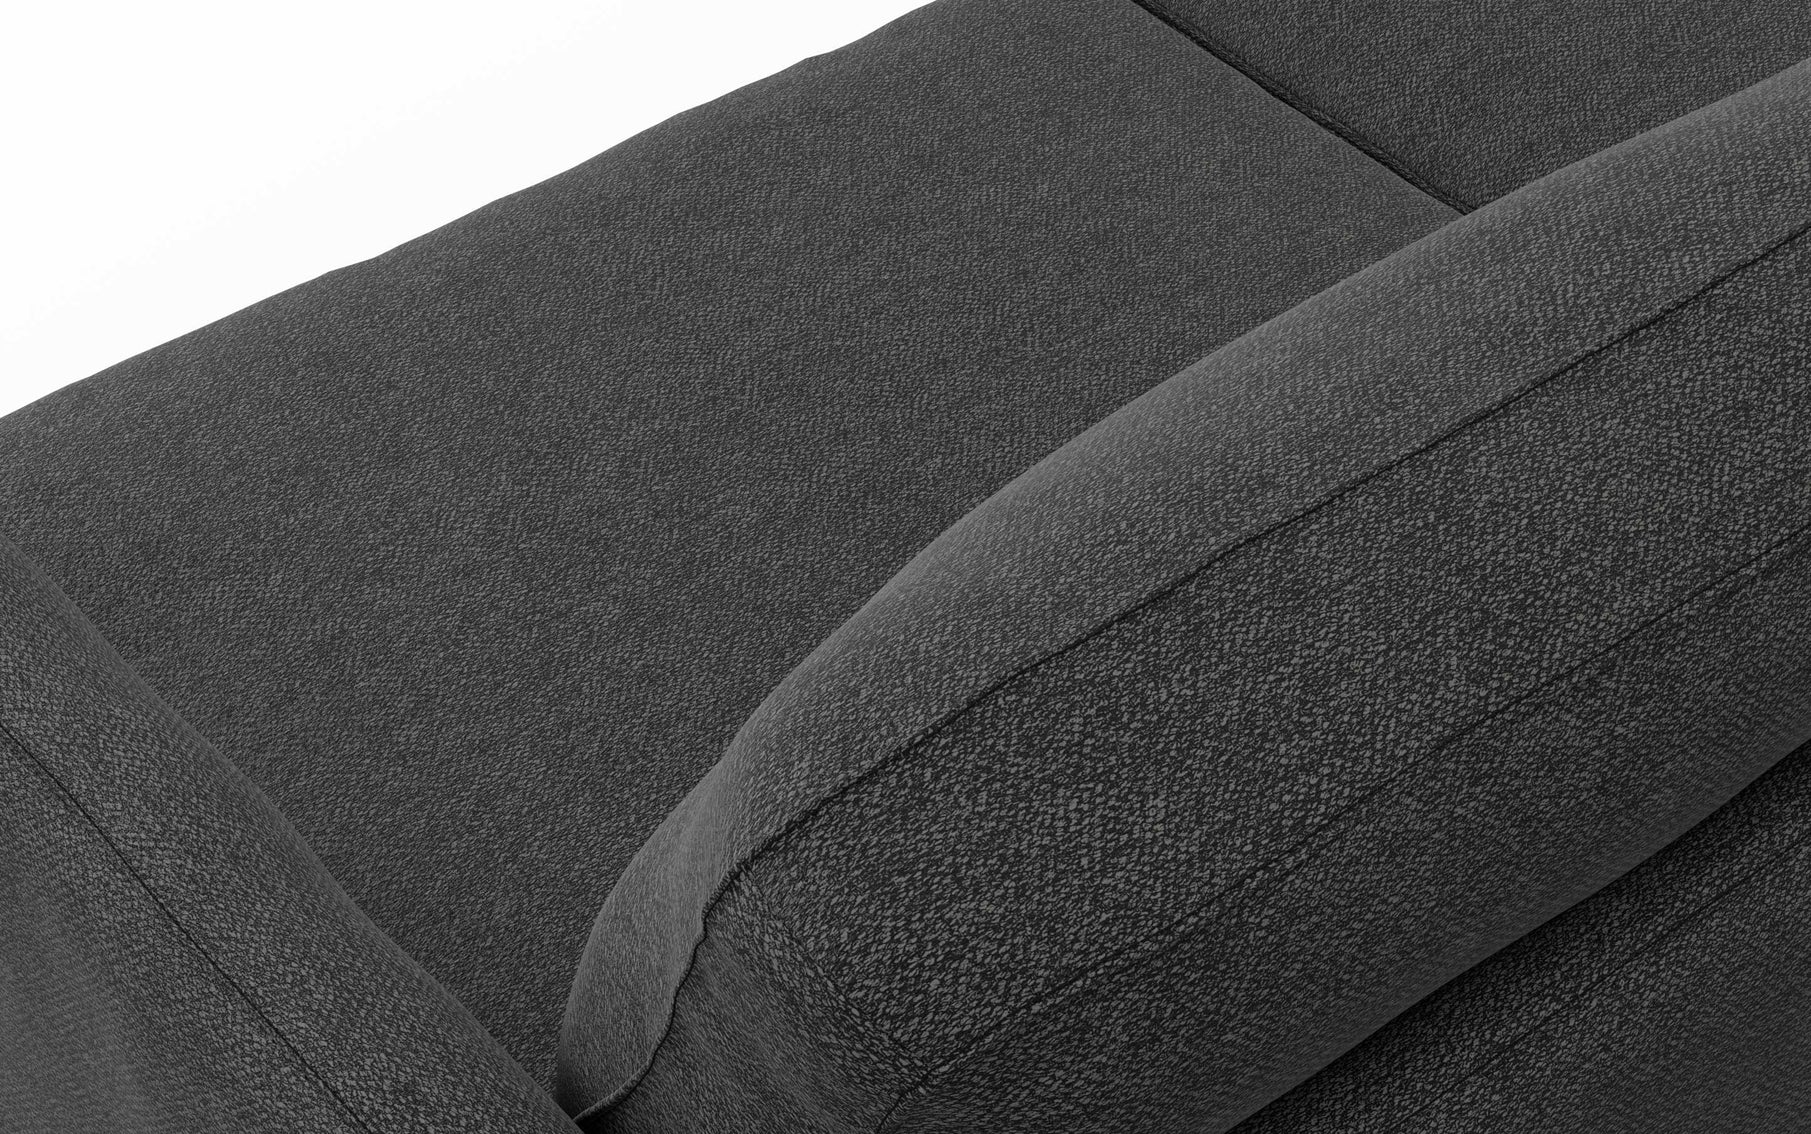 Charcoal Grey Woven Polyester Fabric | Livingston 76 inch Mid Century Sofa